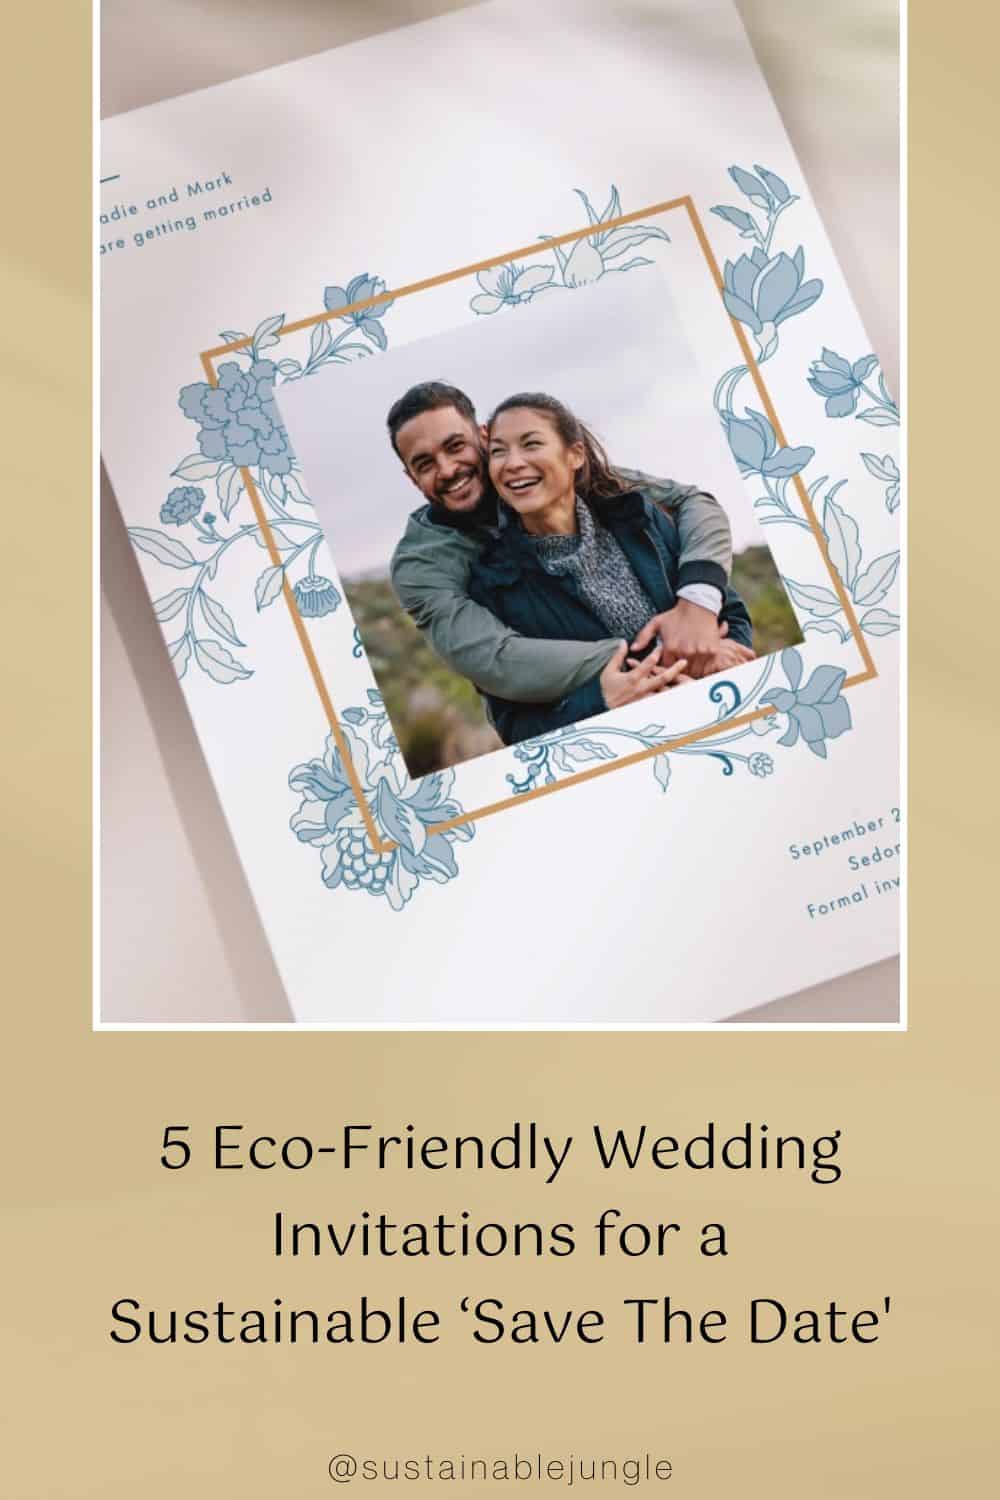 5 Eco-Friendly Wedding Invitations for a Sustainable ‘Save The Date' Image by Paper Culture #ecofriendlyweddinginvitations #ecofriendlyweddinginvites #affordableecofriendlyweddinginvitations #sustainableweddinginvitations #ecofriendlyinvitations #sustainablejungle